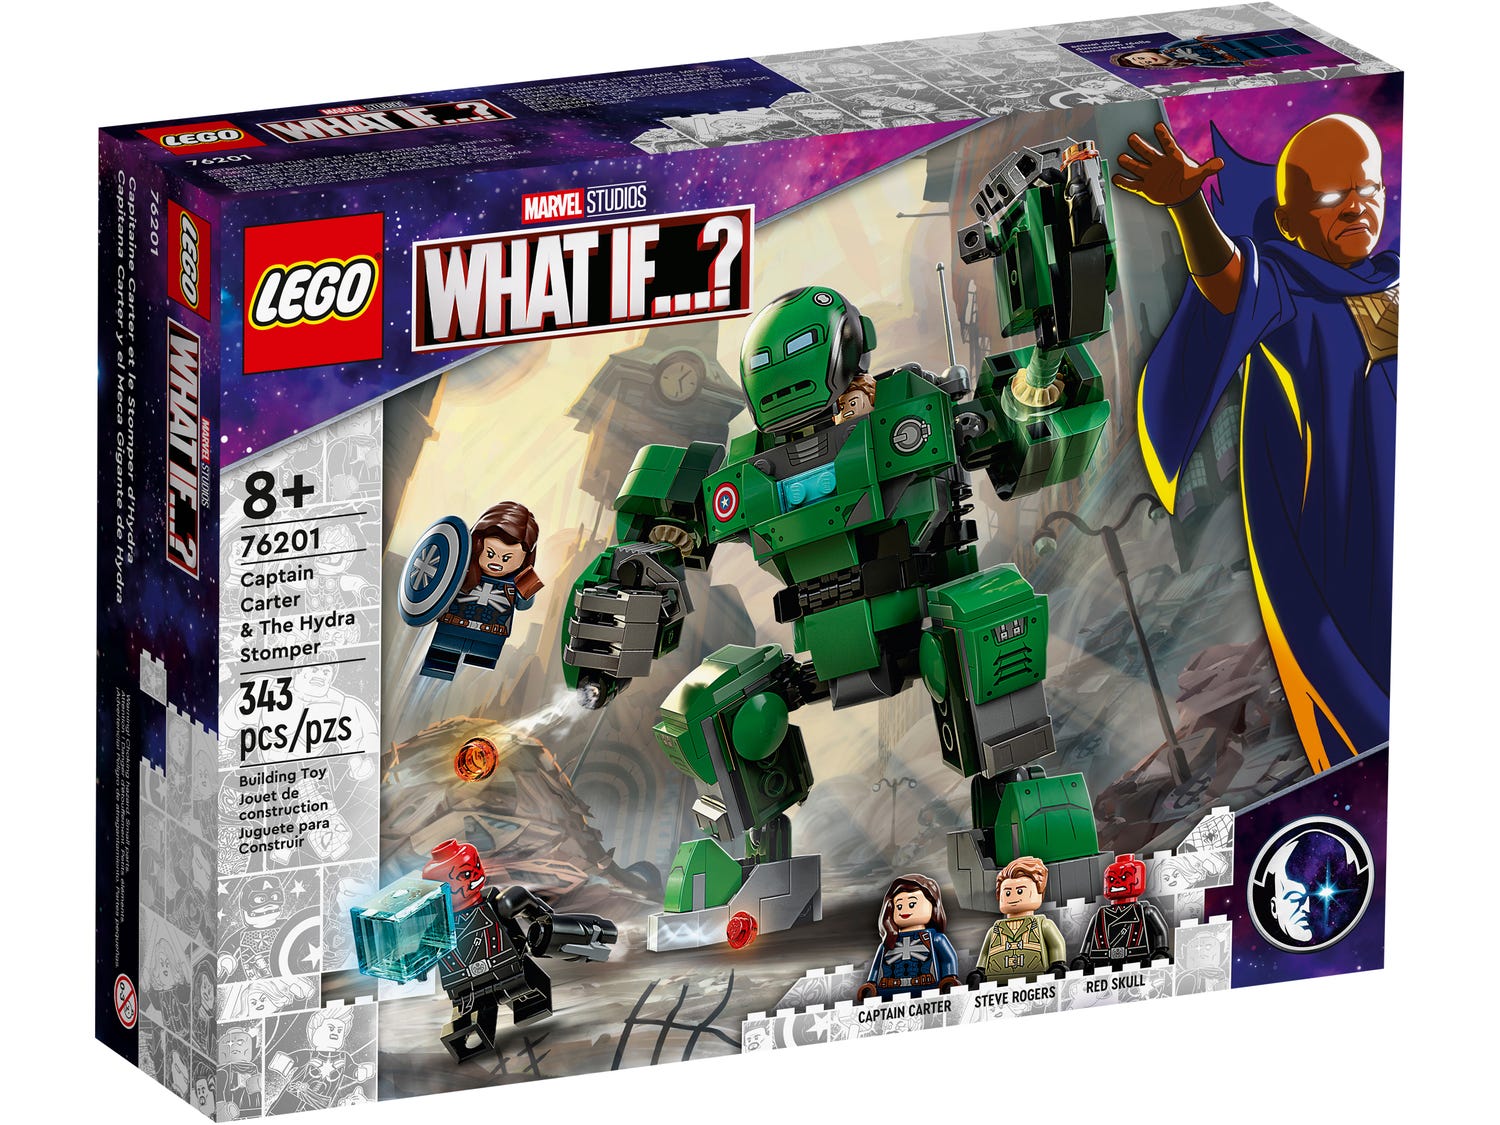 LEGO Just revealed new sets for 